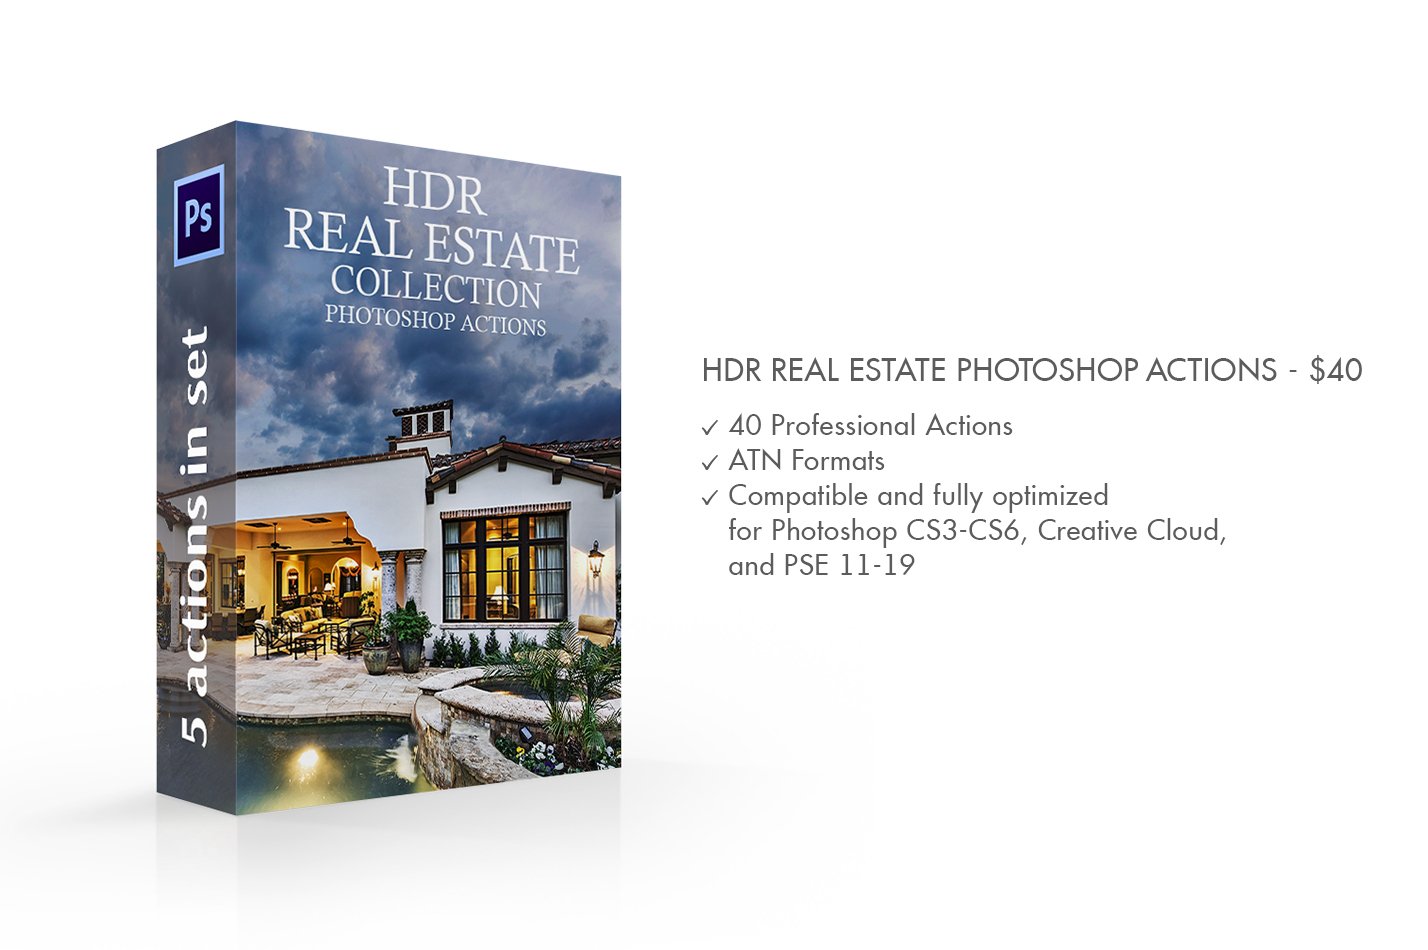 HDR Real Estate Photoshop Actionspreview image.